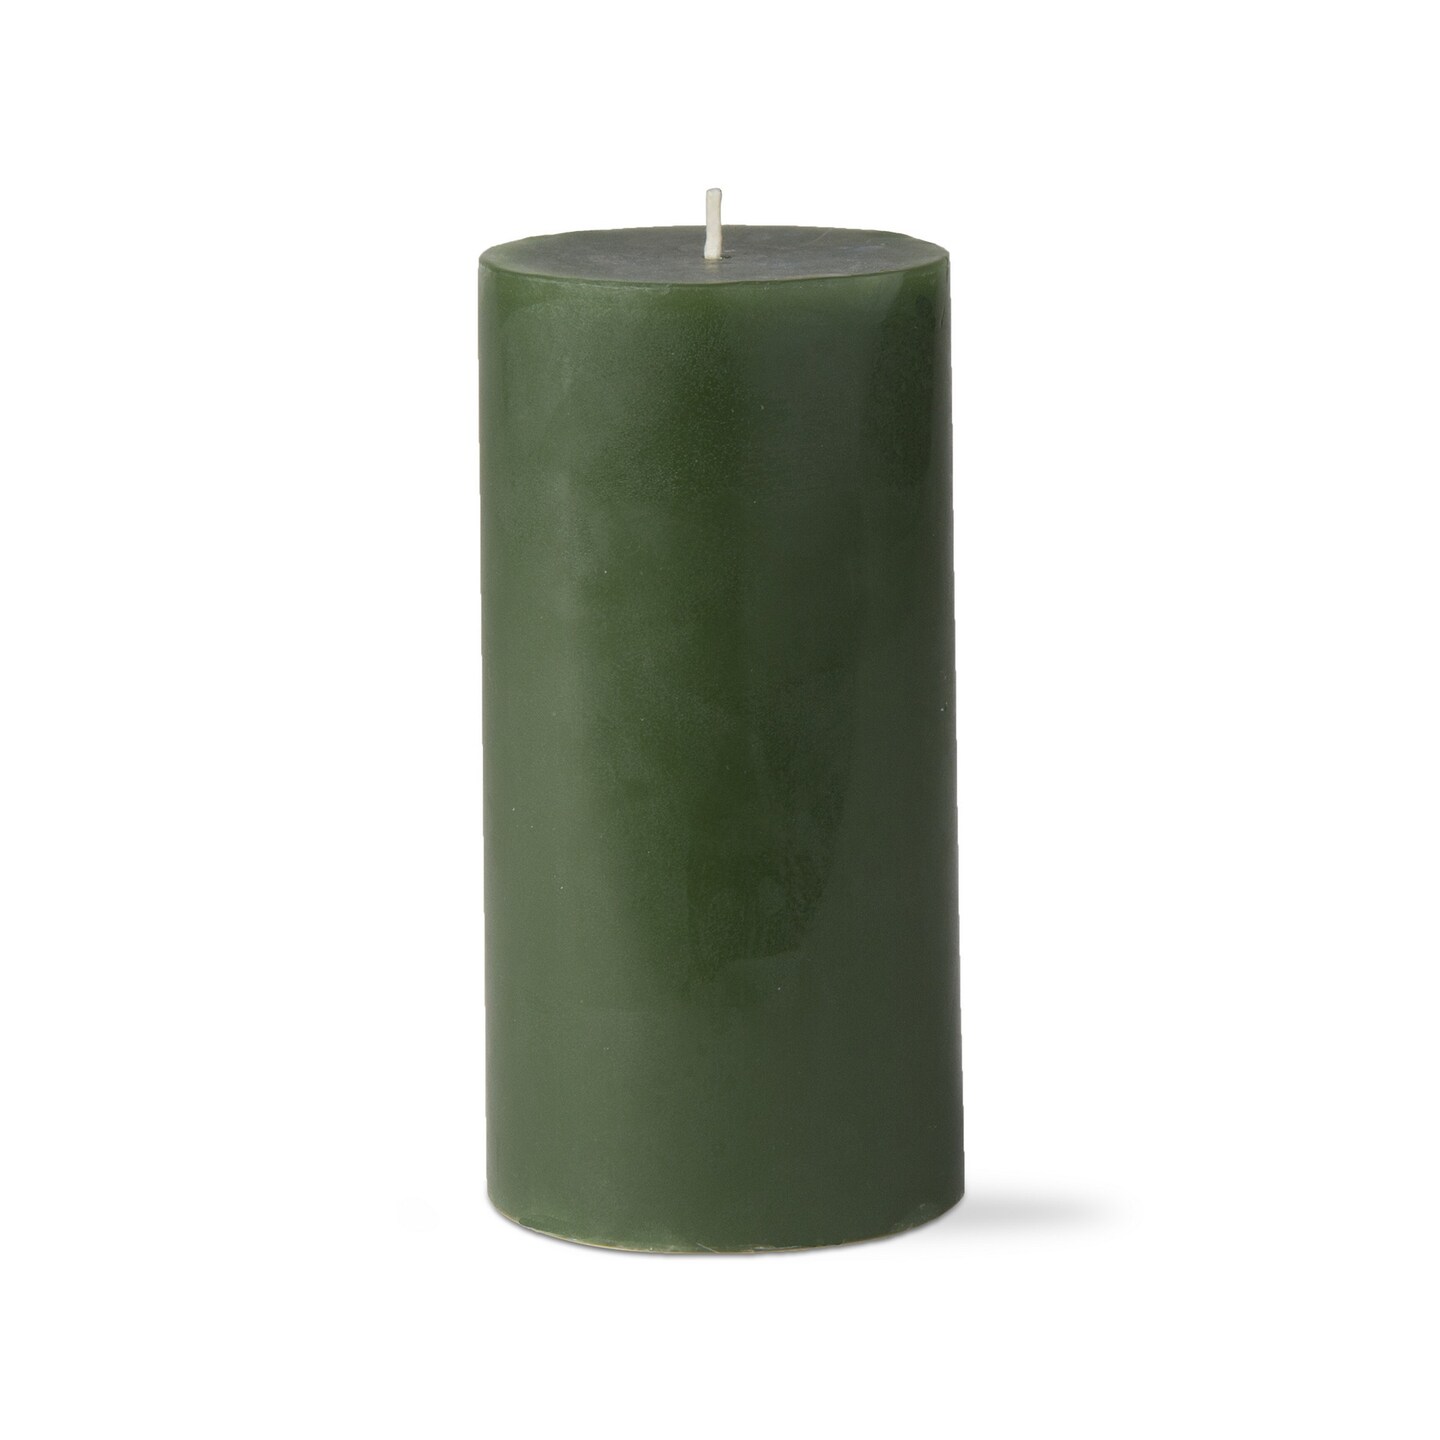 3X6 Custom Color Unscented Paraffin Wax Pillar Dark Green Flat-Topped Candle For Mixed Displays Tall Hurricanes Everyday, Burn Time 80 Hours